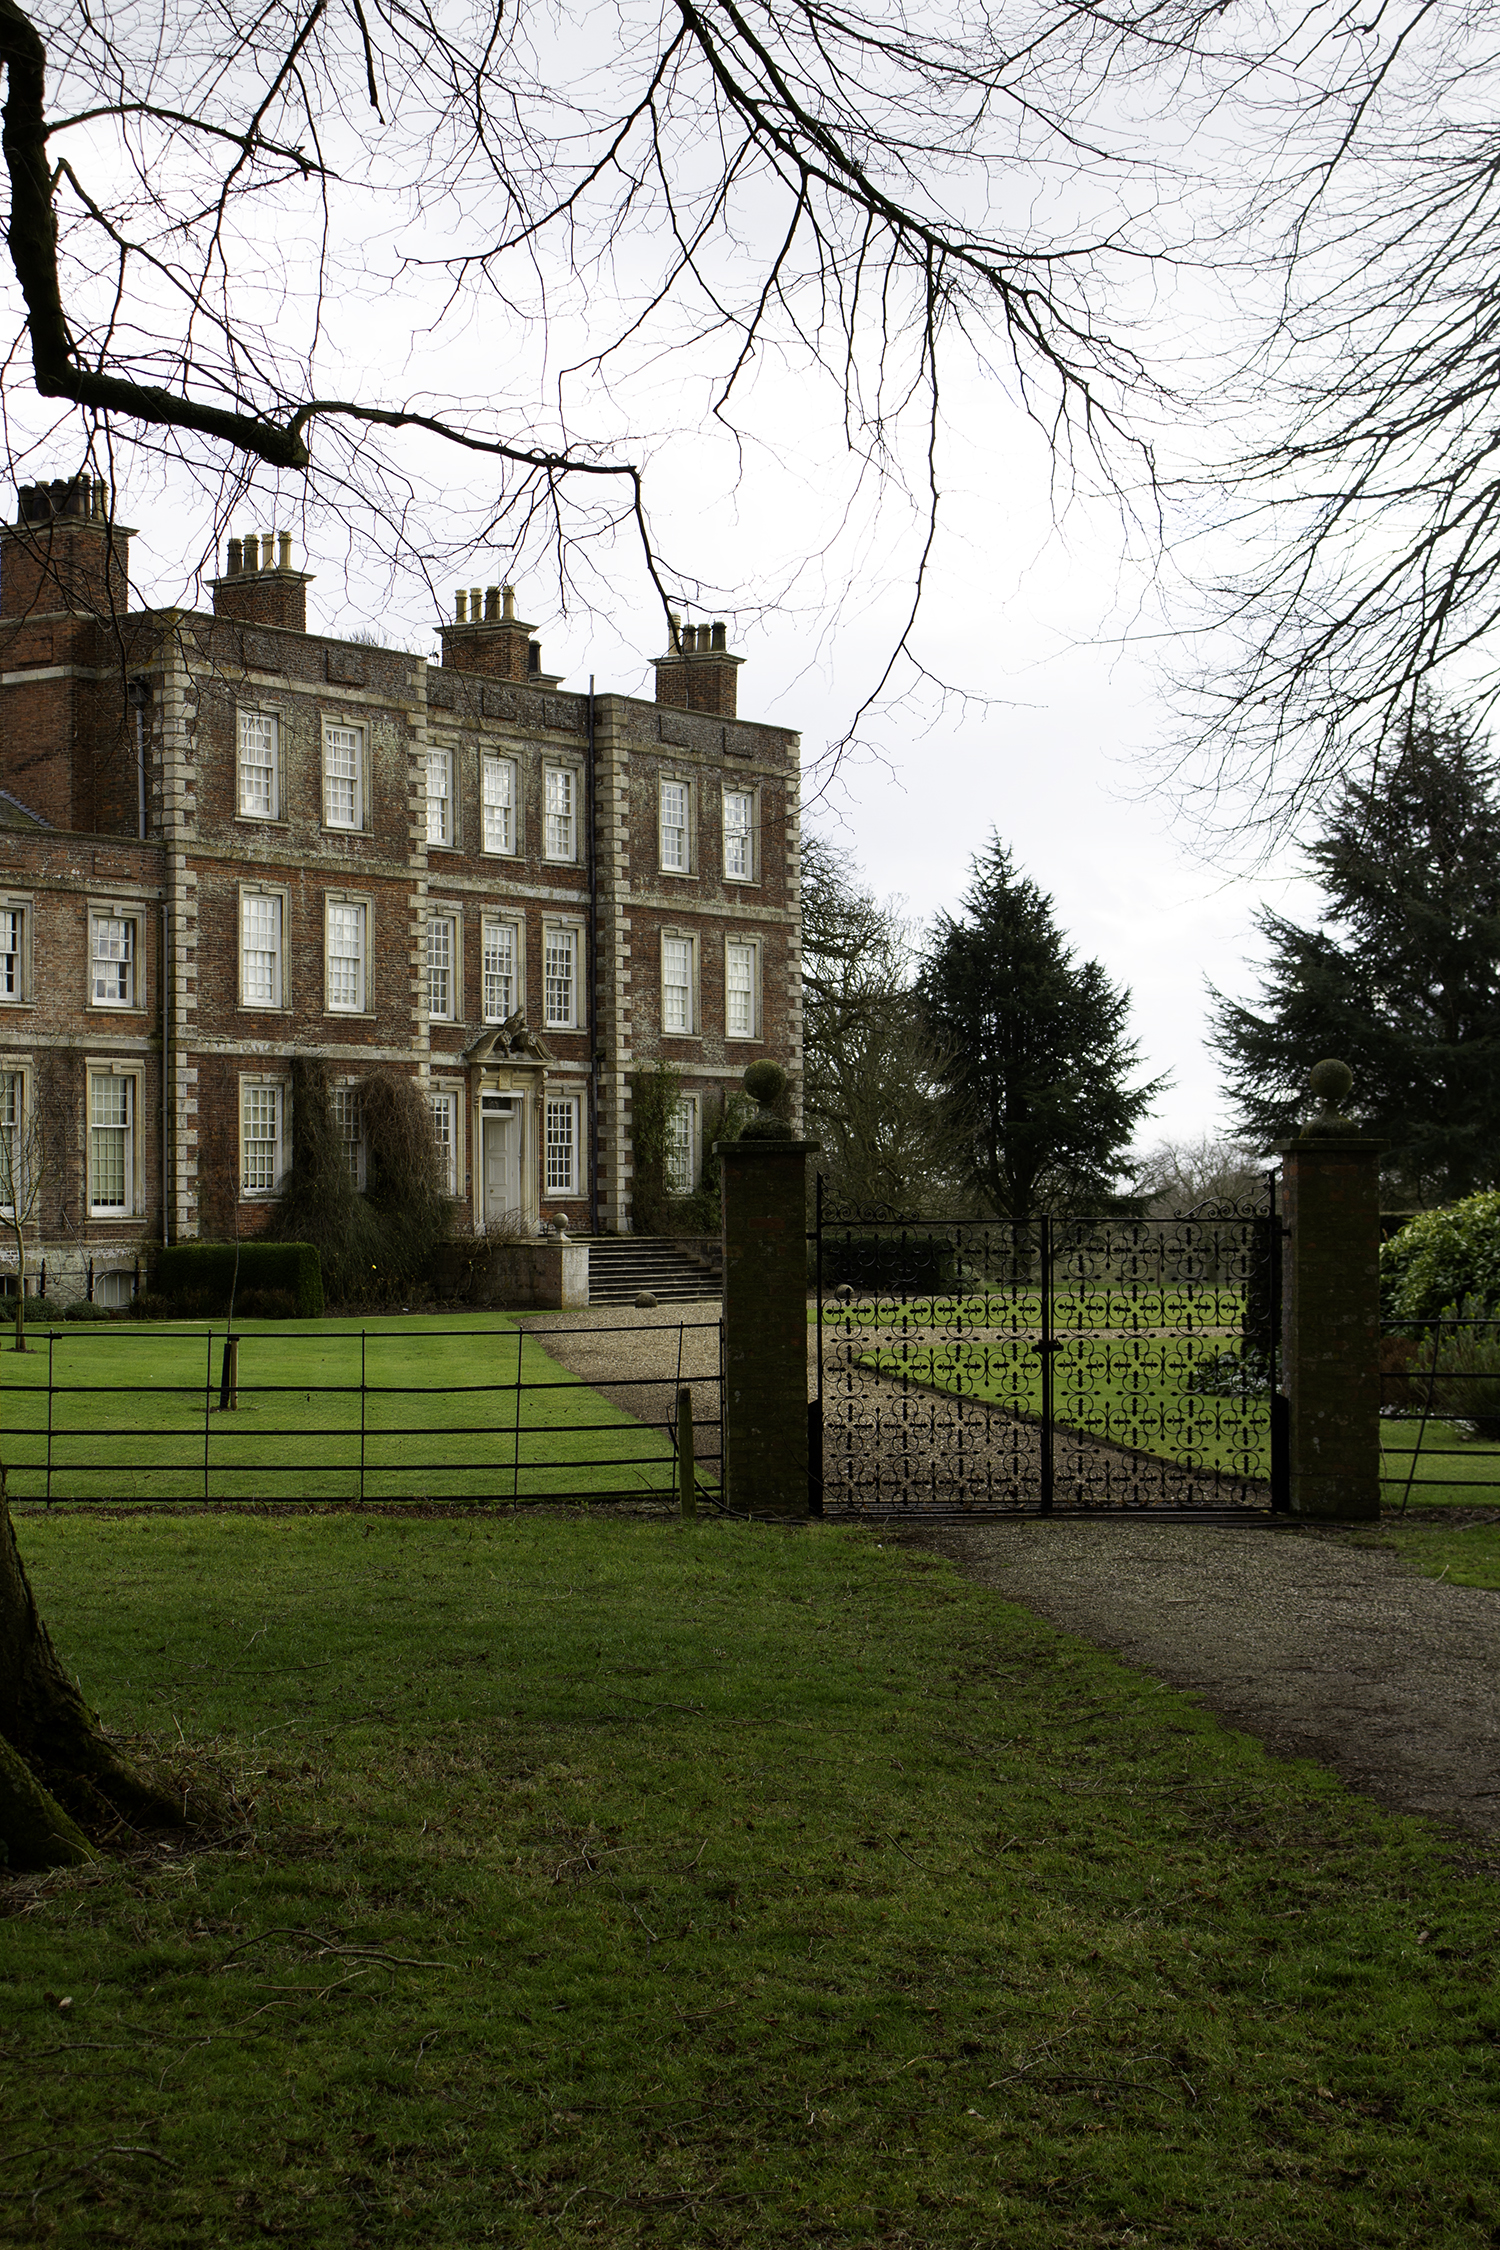 Images of Gunby Hall and Gardens